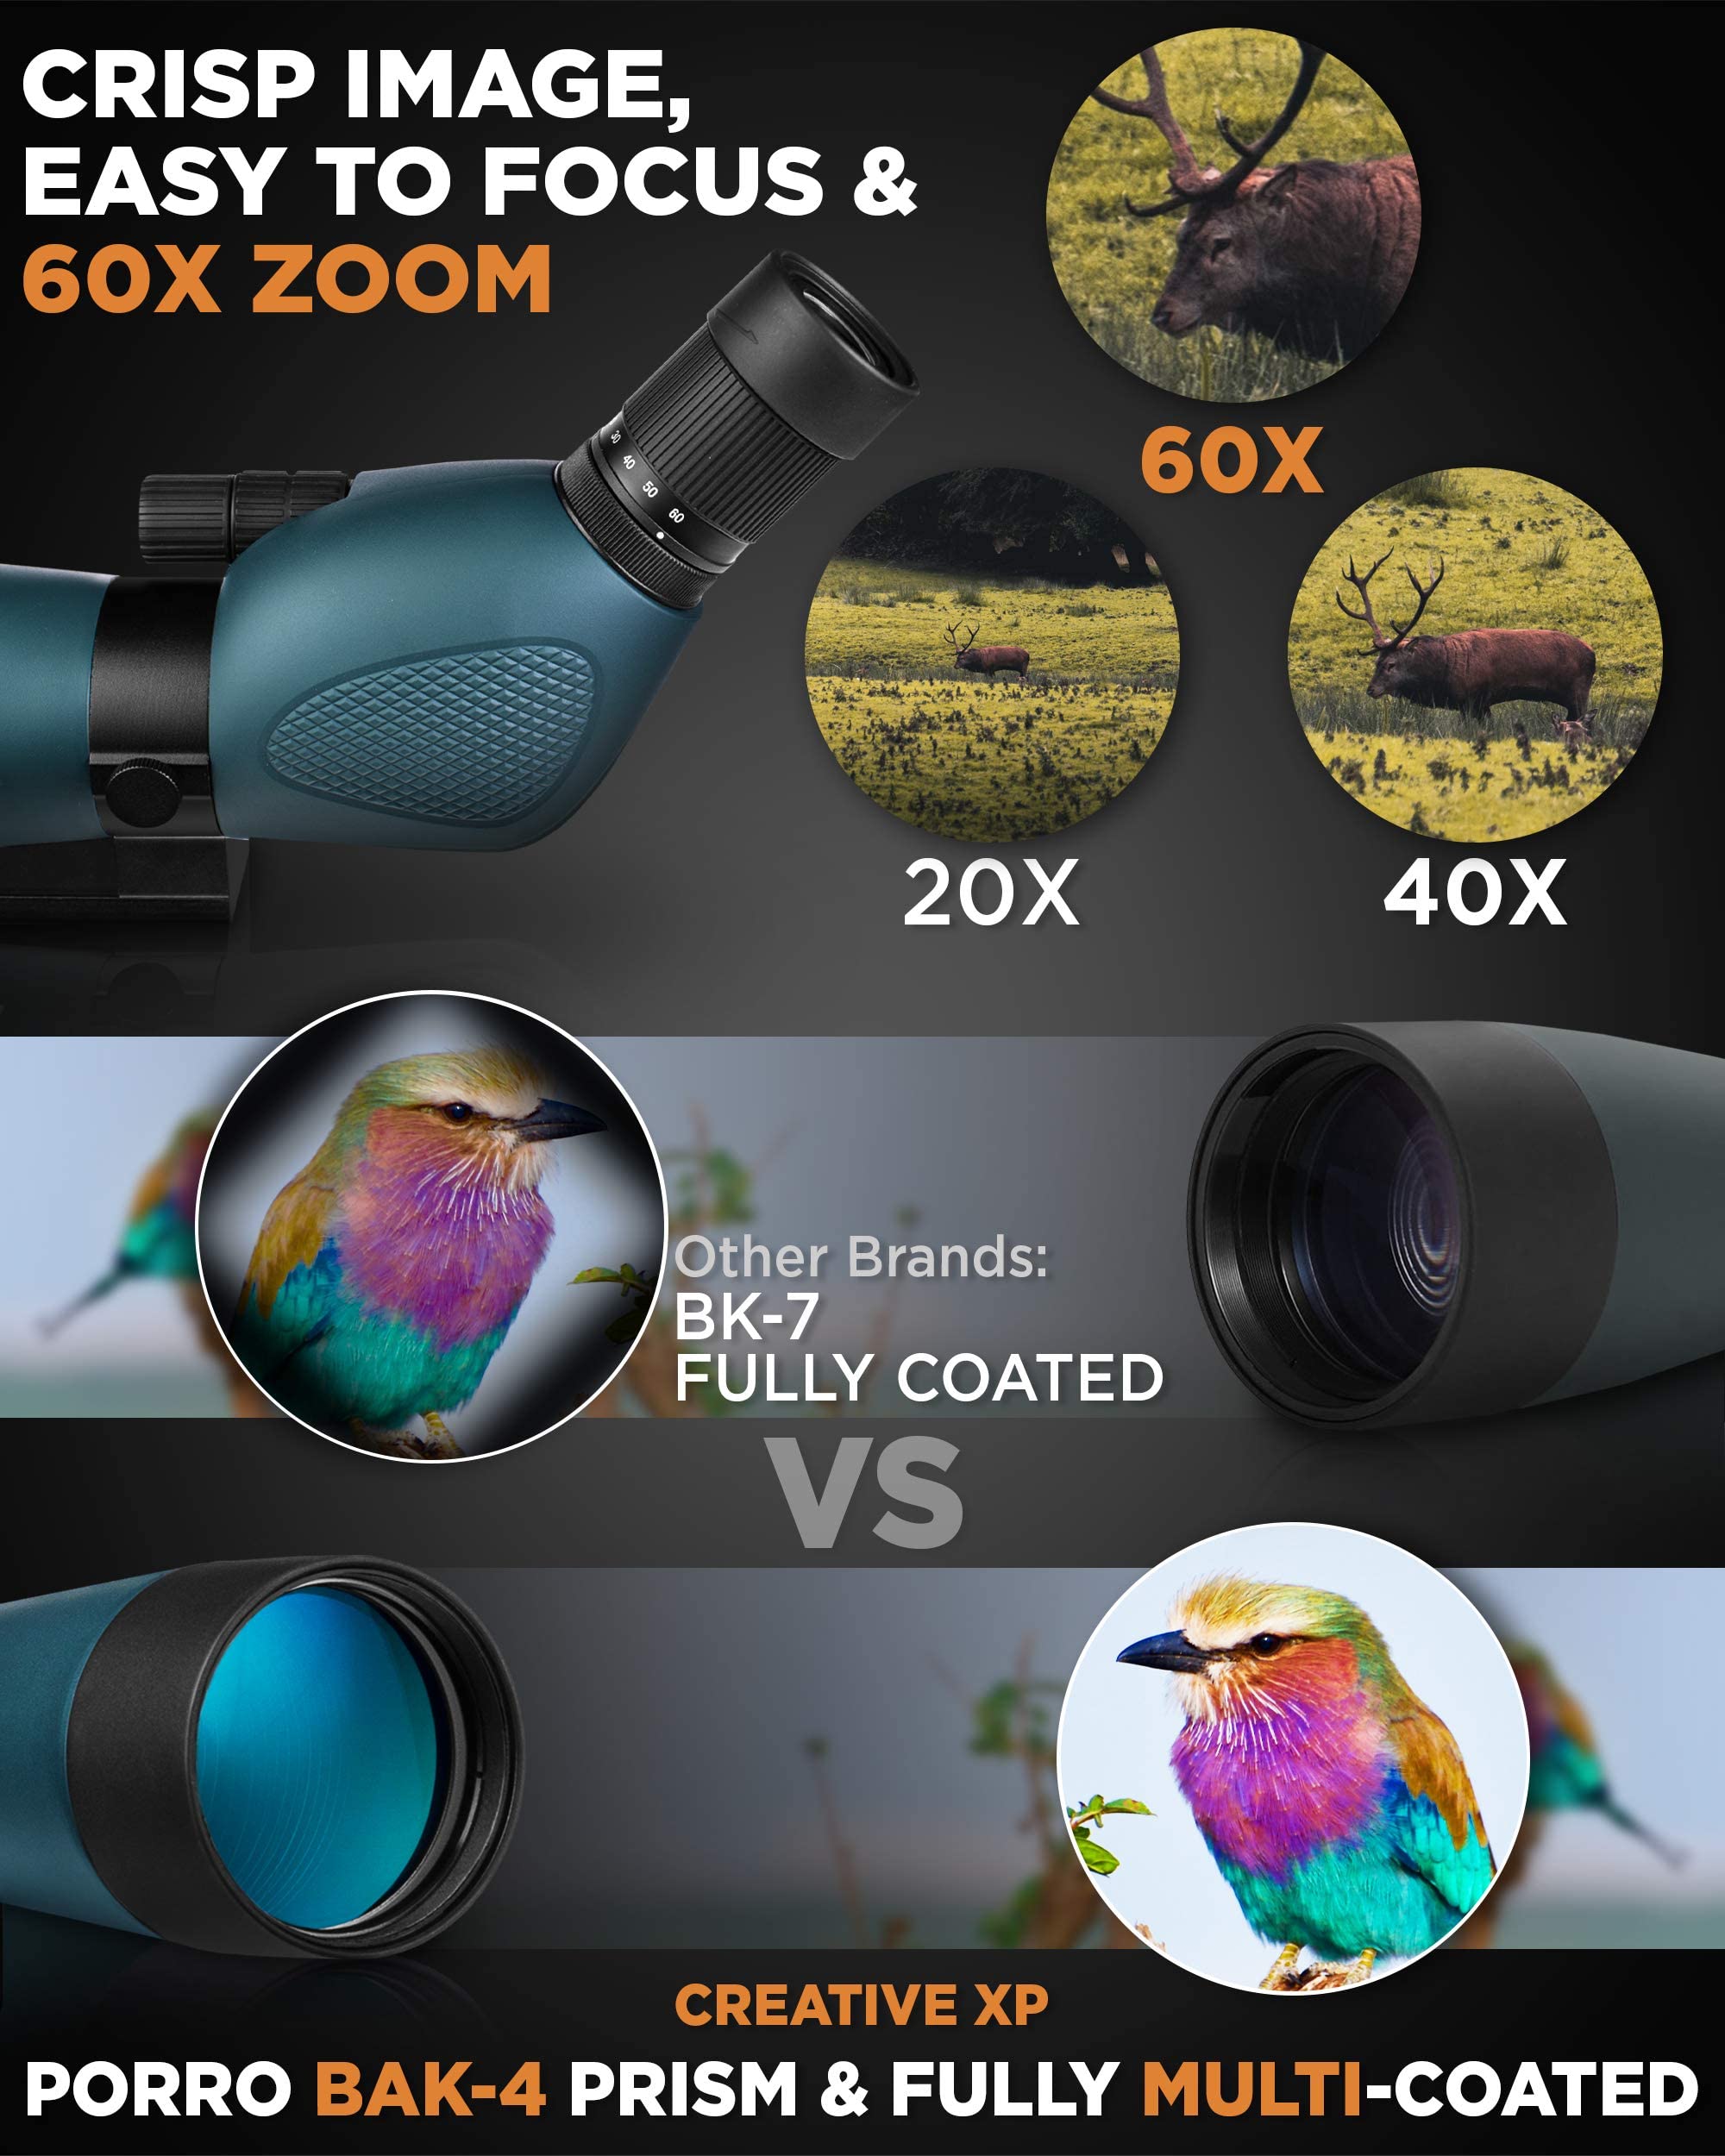 CREATIVE XP Spotting Scopes 20-60x80mm or 20-60x60mm Zoom with FMC Lens, 45 Degree Angled Eyepiece, Fogproof Spotting Scope with Tripod, Compact with Phone Adapter for Birding Watching